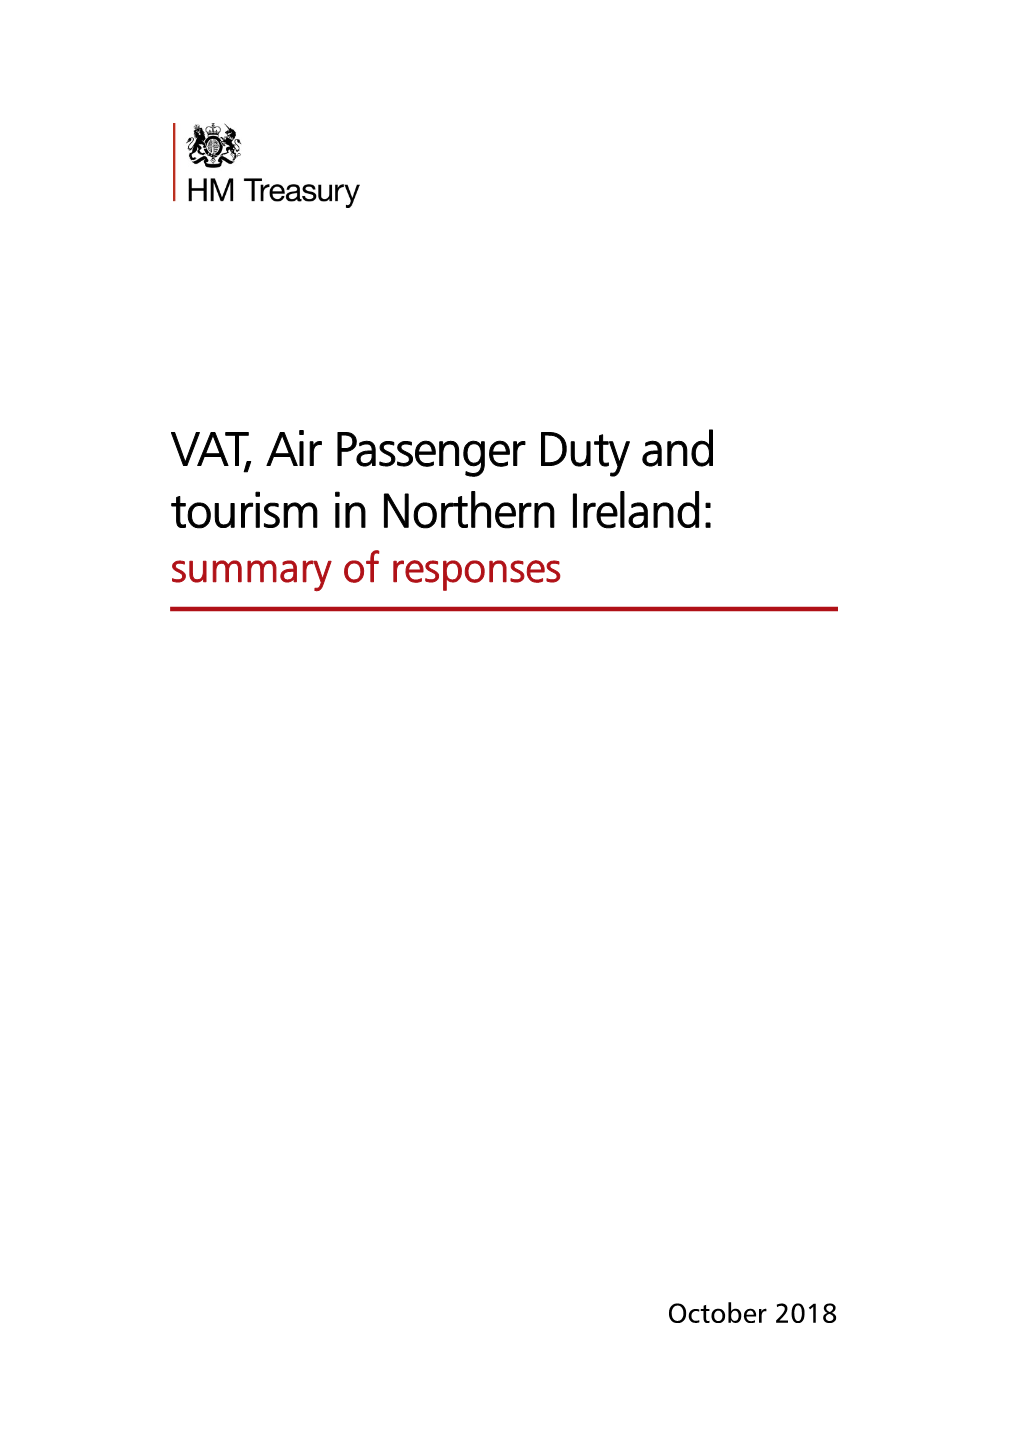 VAT, Air Passenger Duty and Tourism in Northern Ireland: Summary of Responses